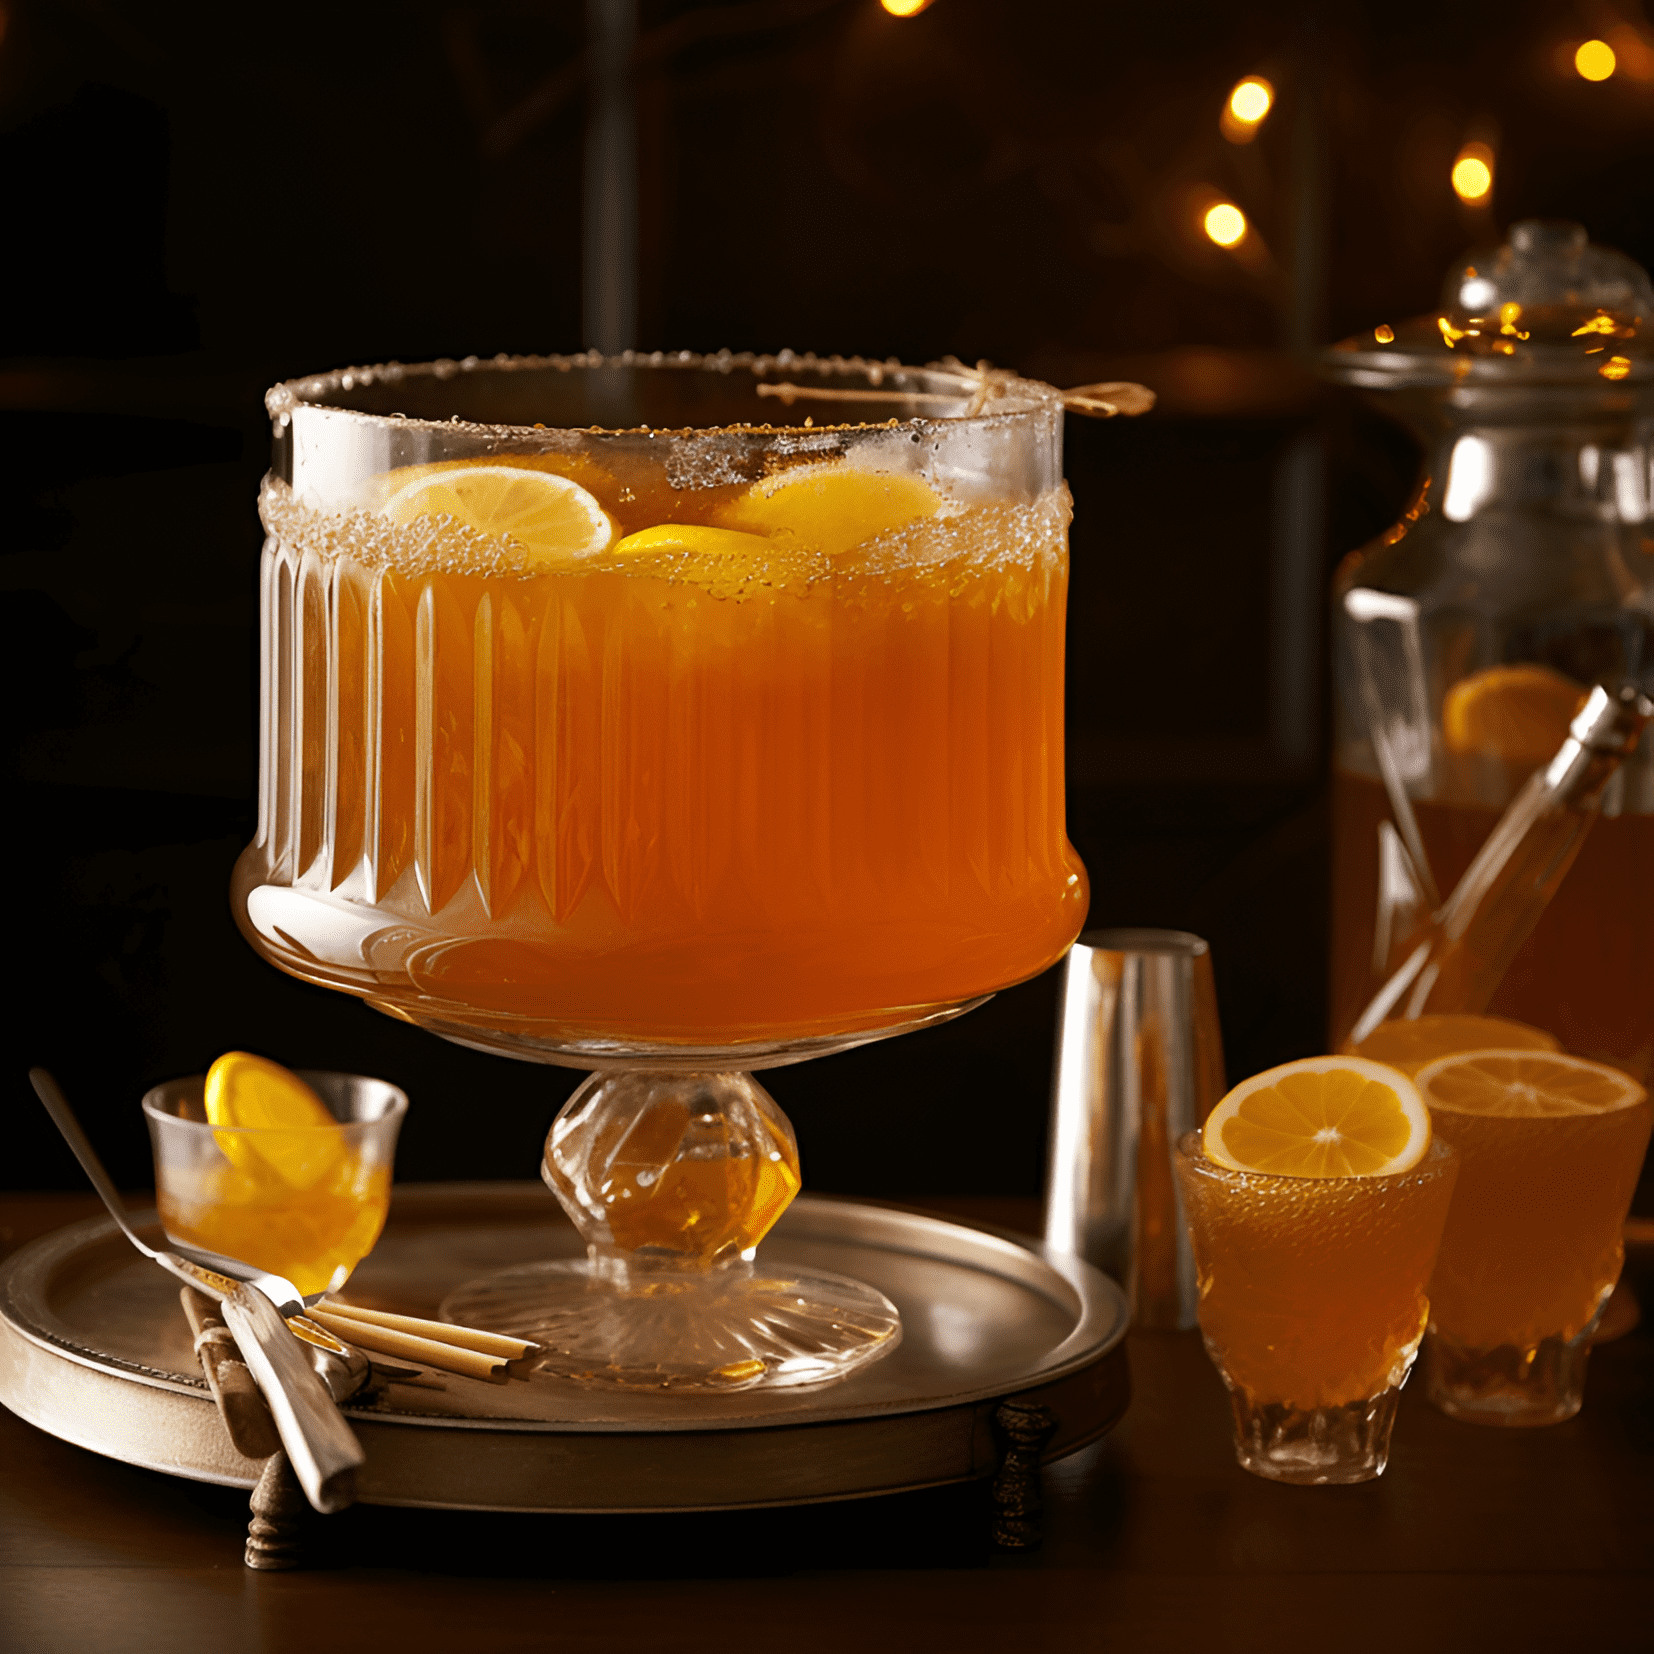 Fish House Punch is a well-balanced cocktail with a mix of sweet, sour, and fruity flavors. It has a smooth, velvety texture and a pleasant warmth from the combination of rum, cognac, and peach brandy.